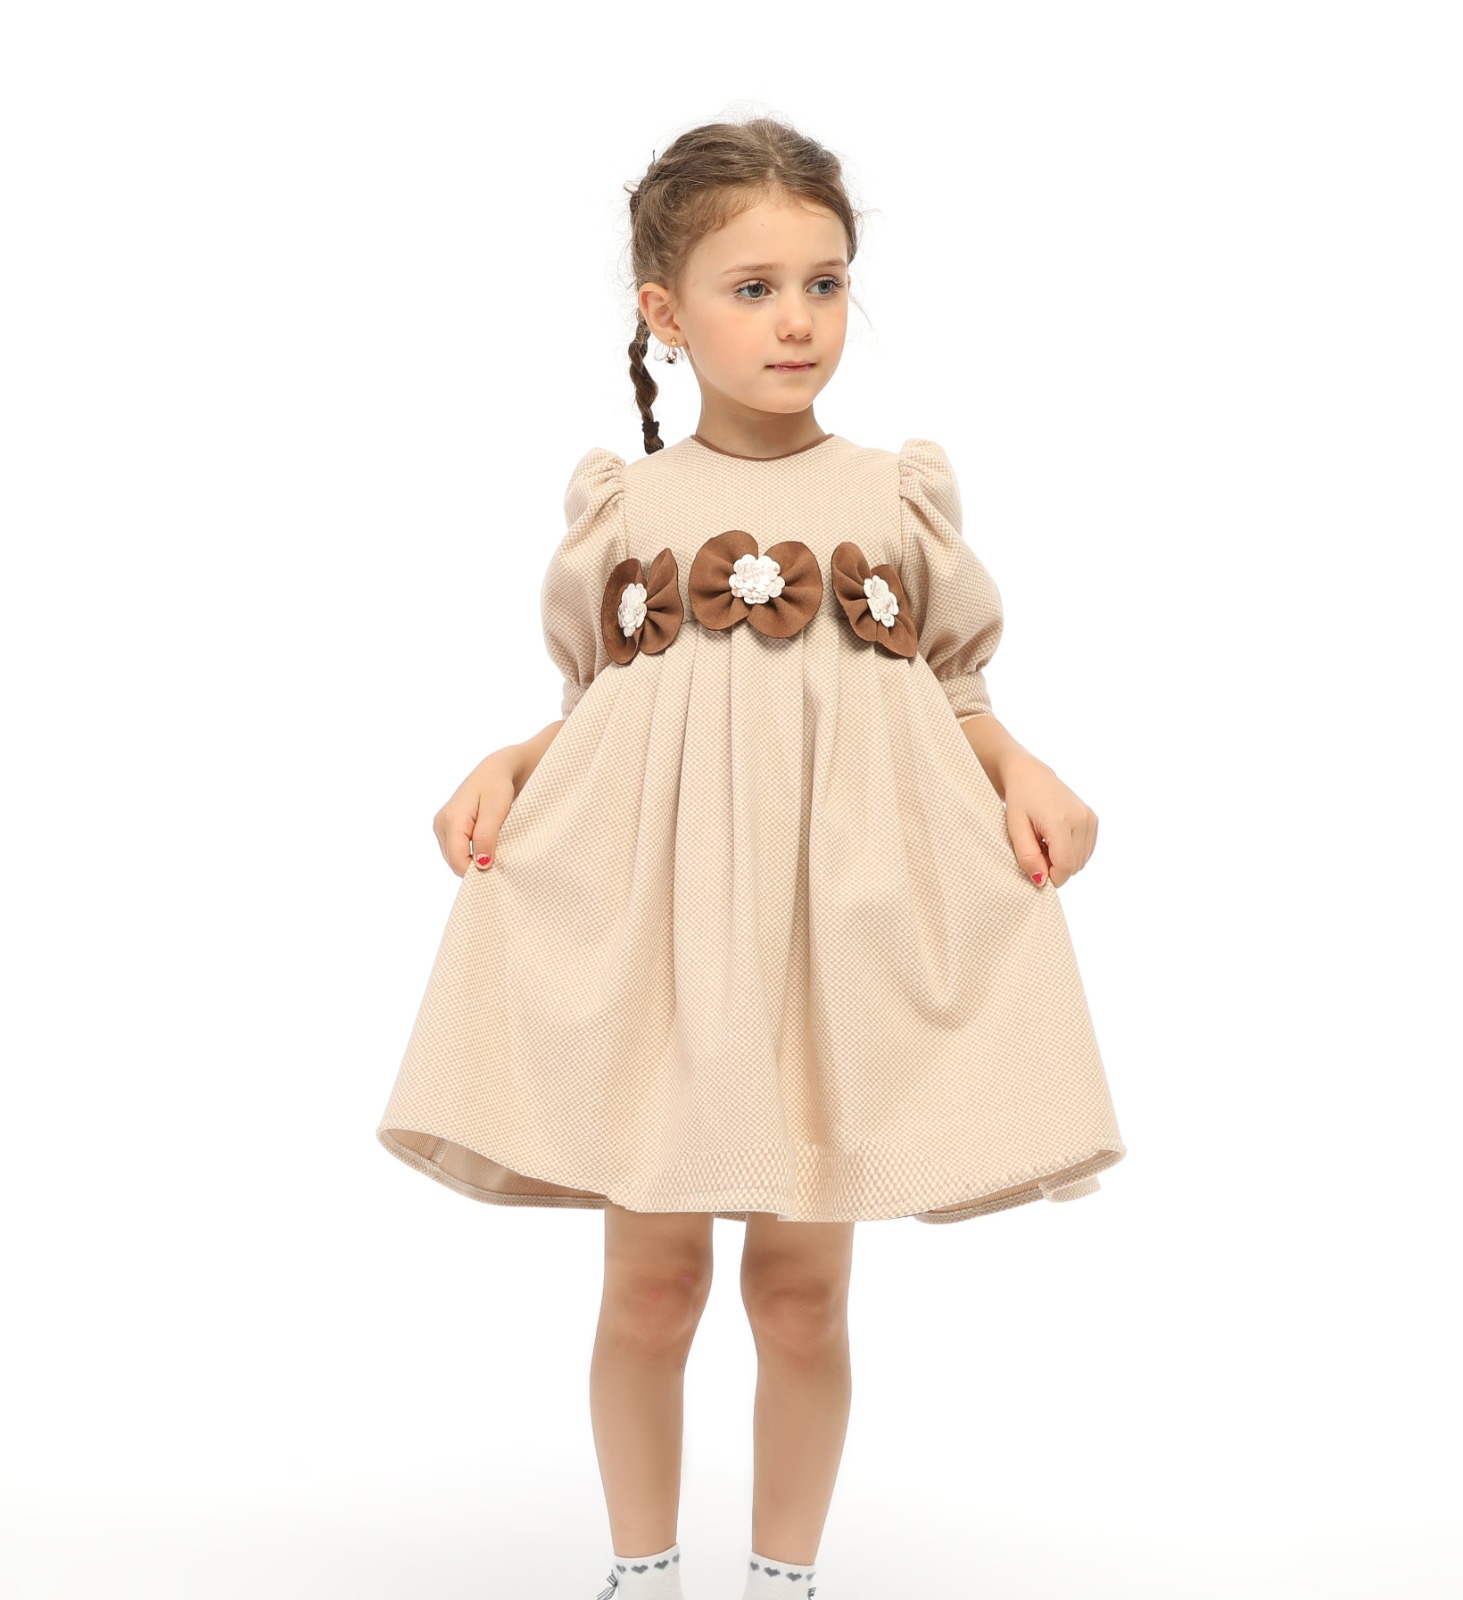 Home | Raval | Buy Latest Fashion Kids Clothes